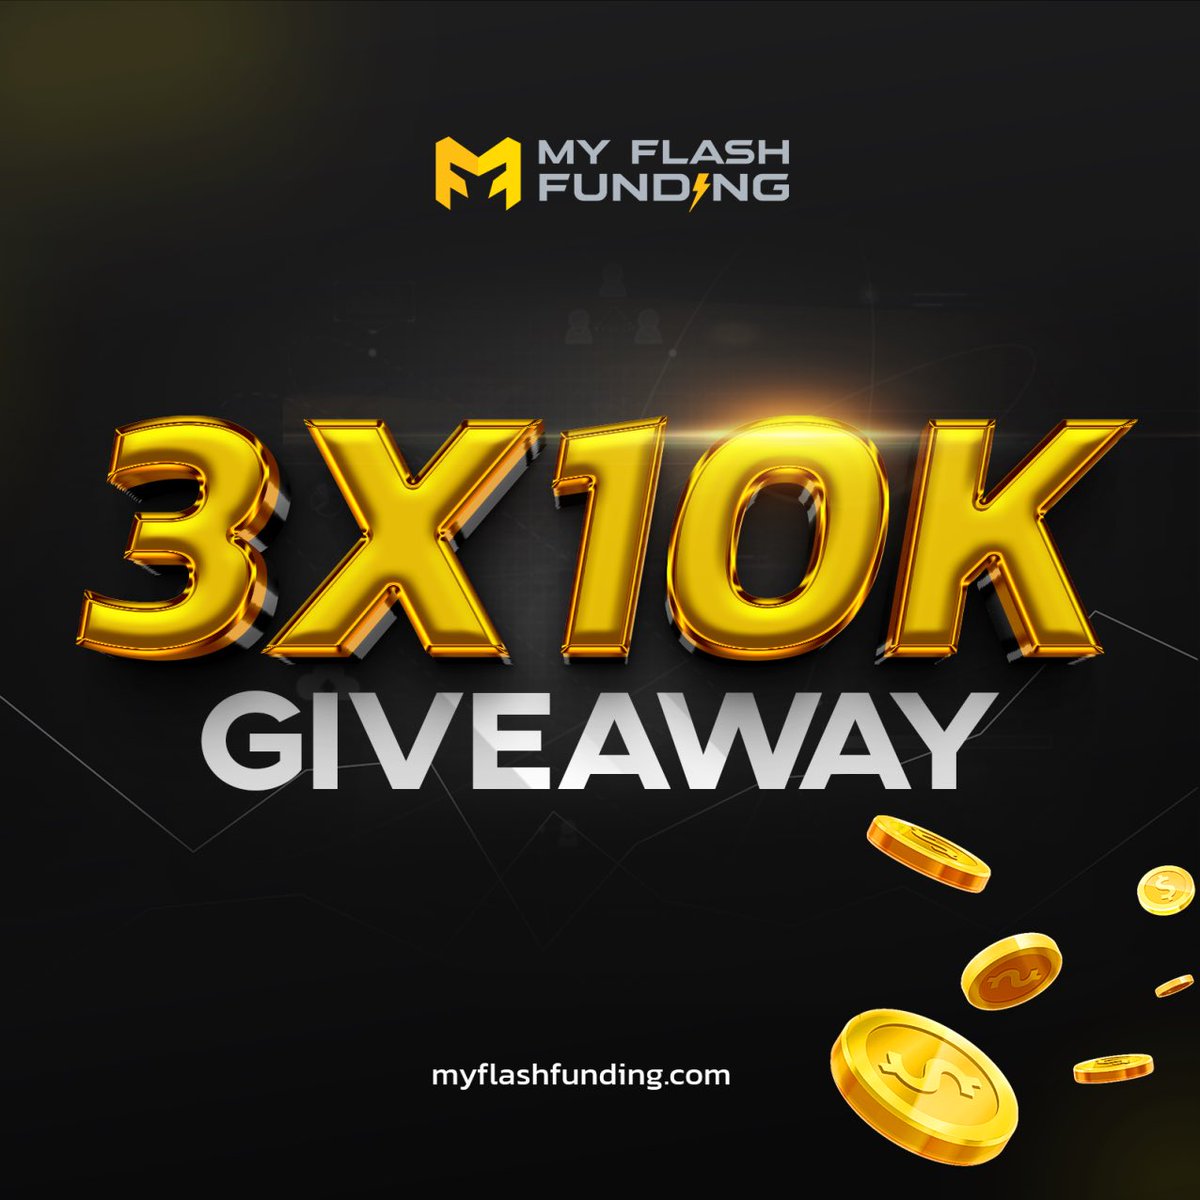 🚨 30,000$ Giveaway 🚨 To enter : 1️⃣ Must Follow ~ @TraderKaizen0 @myflashfunding Also follow : @taptapFX2 @RazihelFX @sherly_FX @kr4zyguy_ @TheMagnetarFx @ZhayneFx 2️⃣ Tag Friends 👥 3️⃣ Like and RT 🔁❤️ 4️⃣ Engage on my Pinned Post Winners in 5 days! 🕠